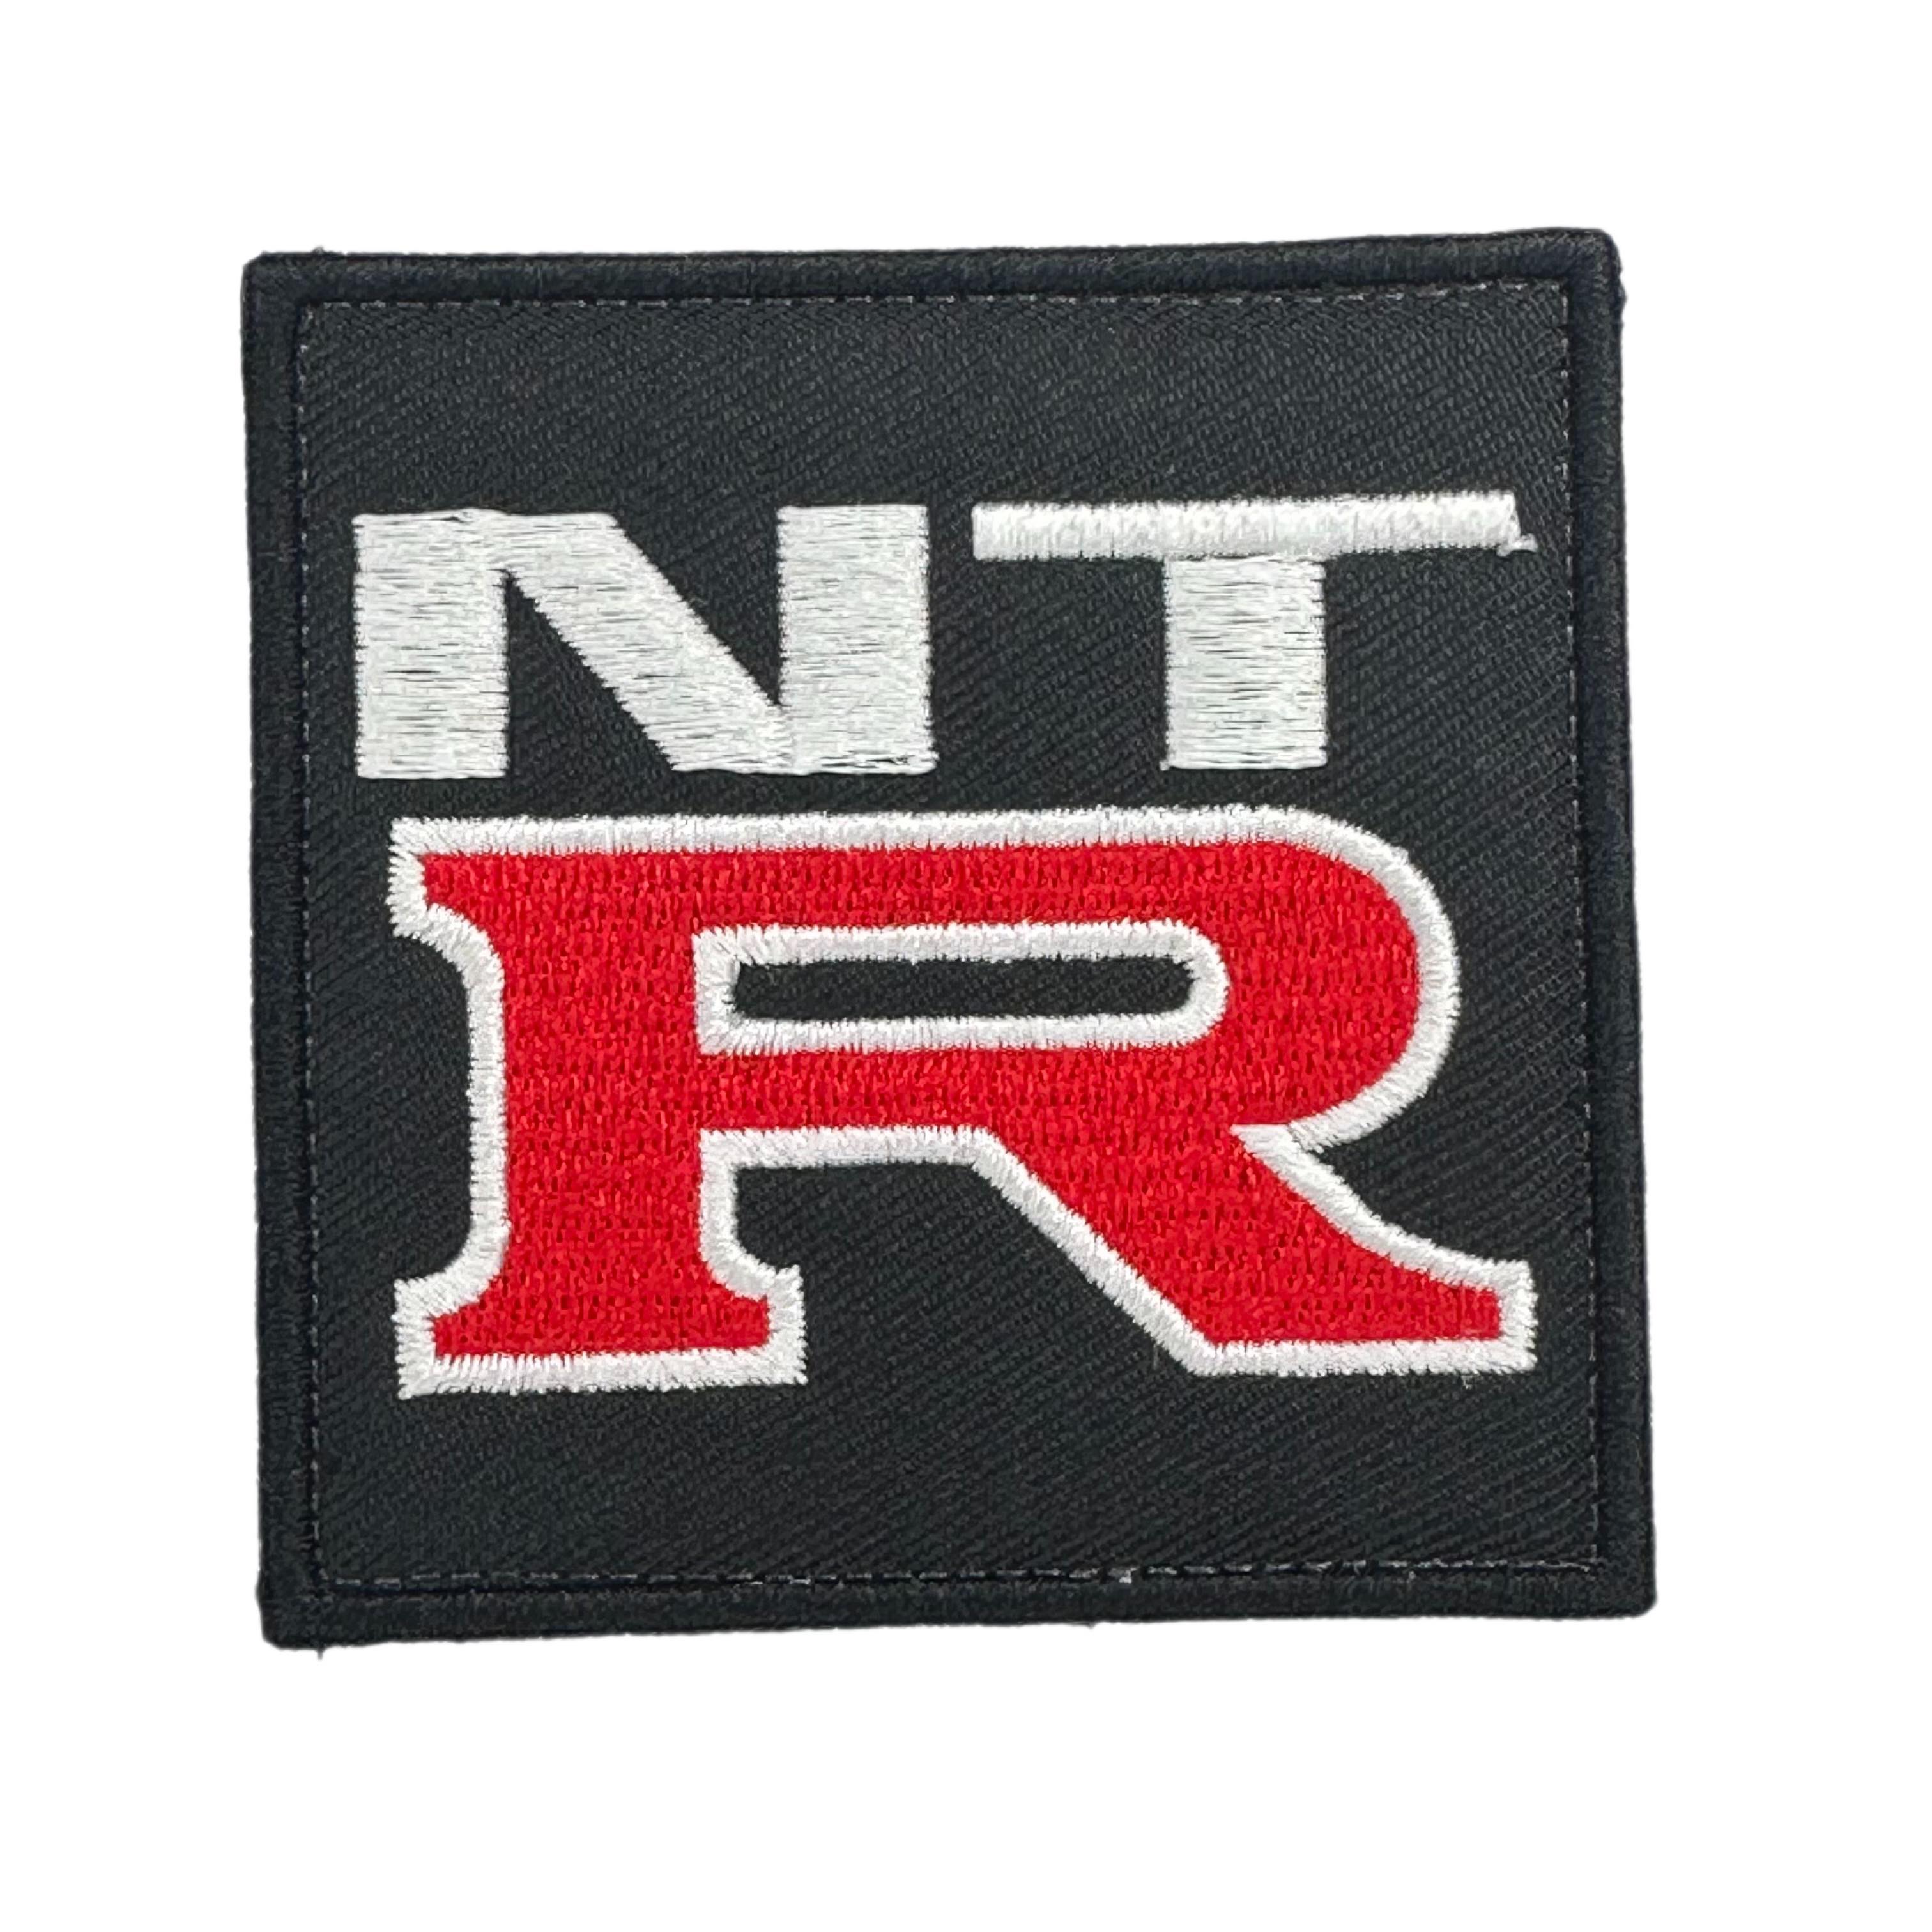 NTR Embroidered Velcro Morale Patch